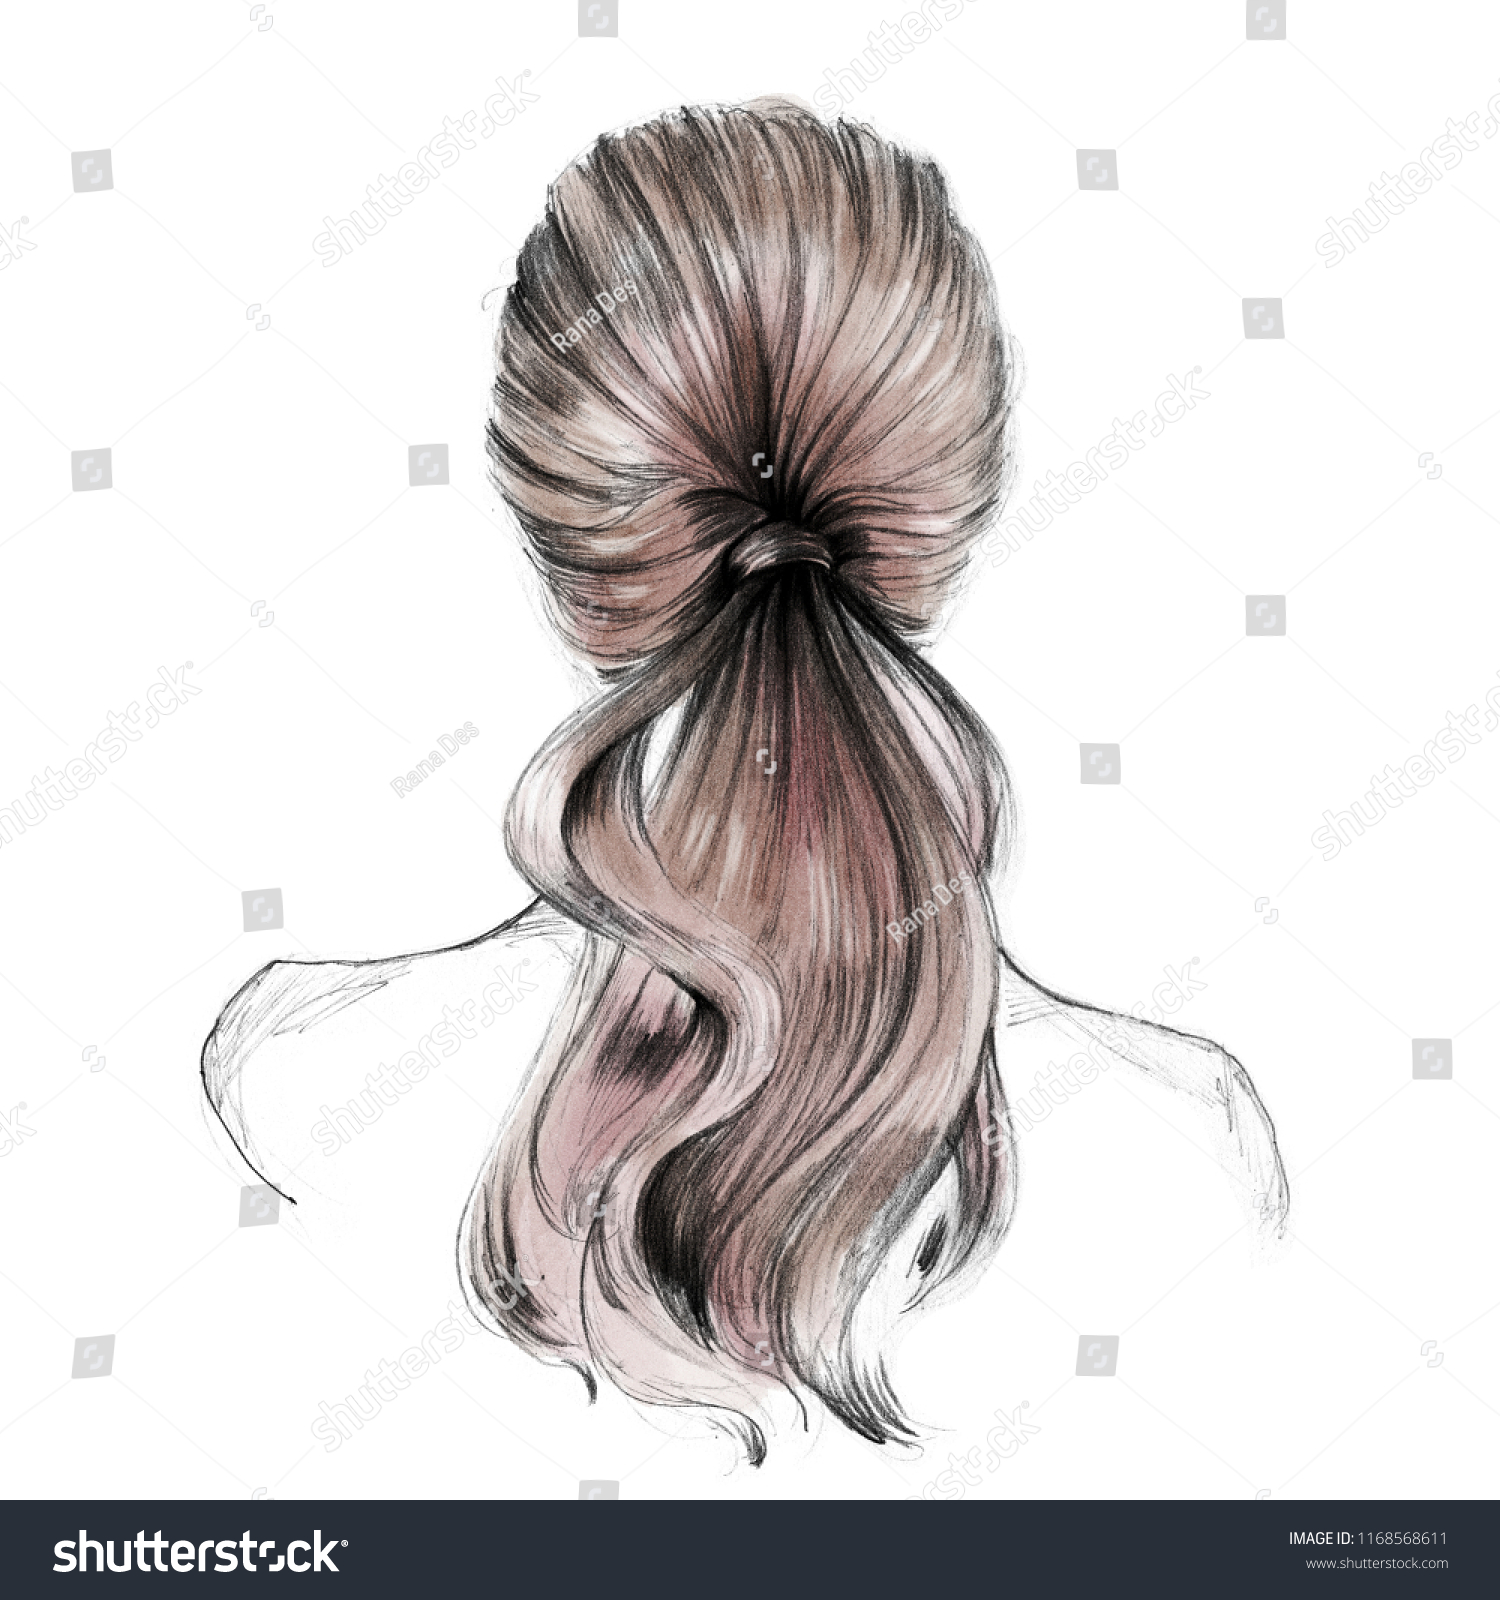 Beautiful Long Hair Young Woman Hairstyle Stock Image